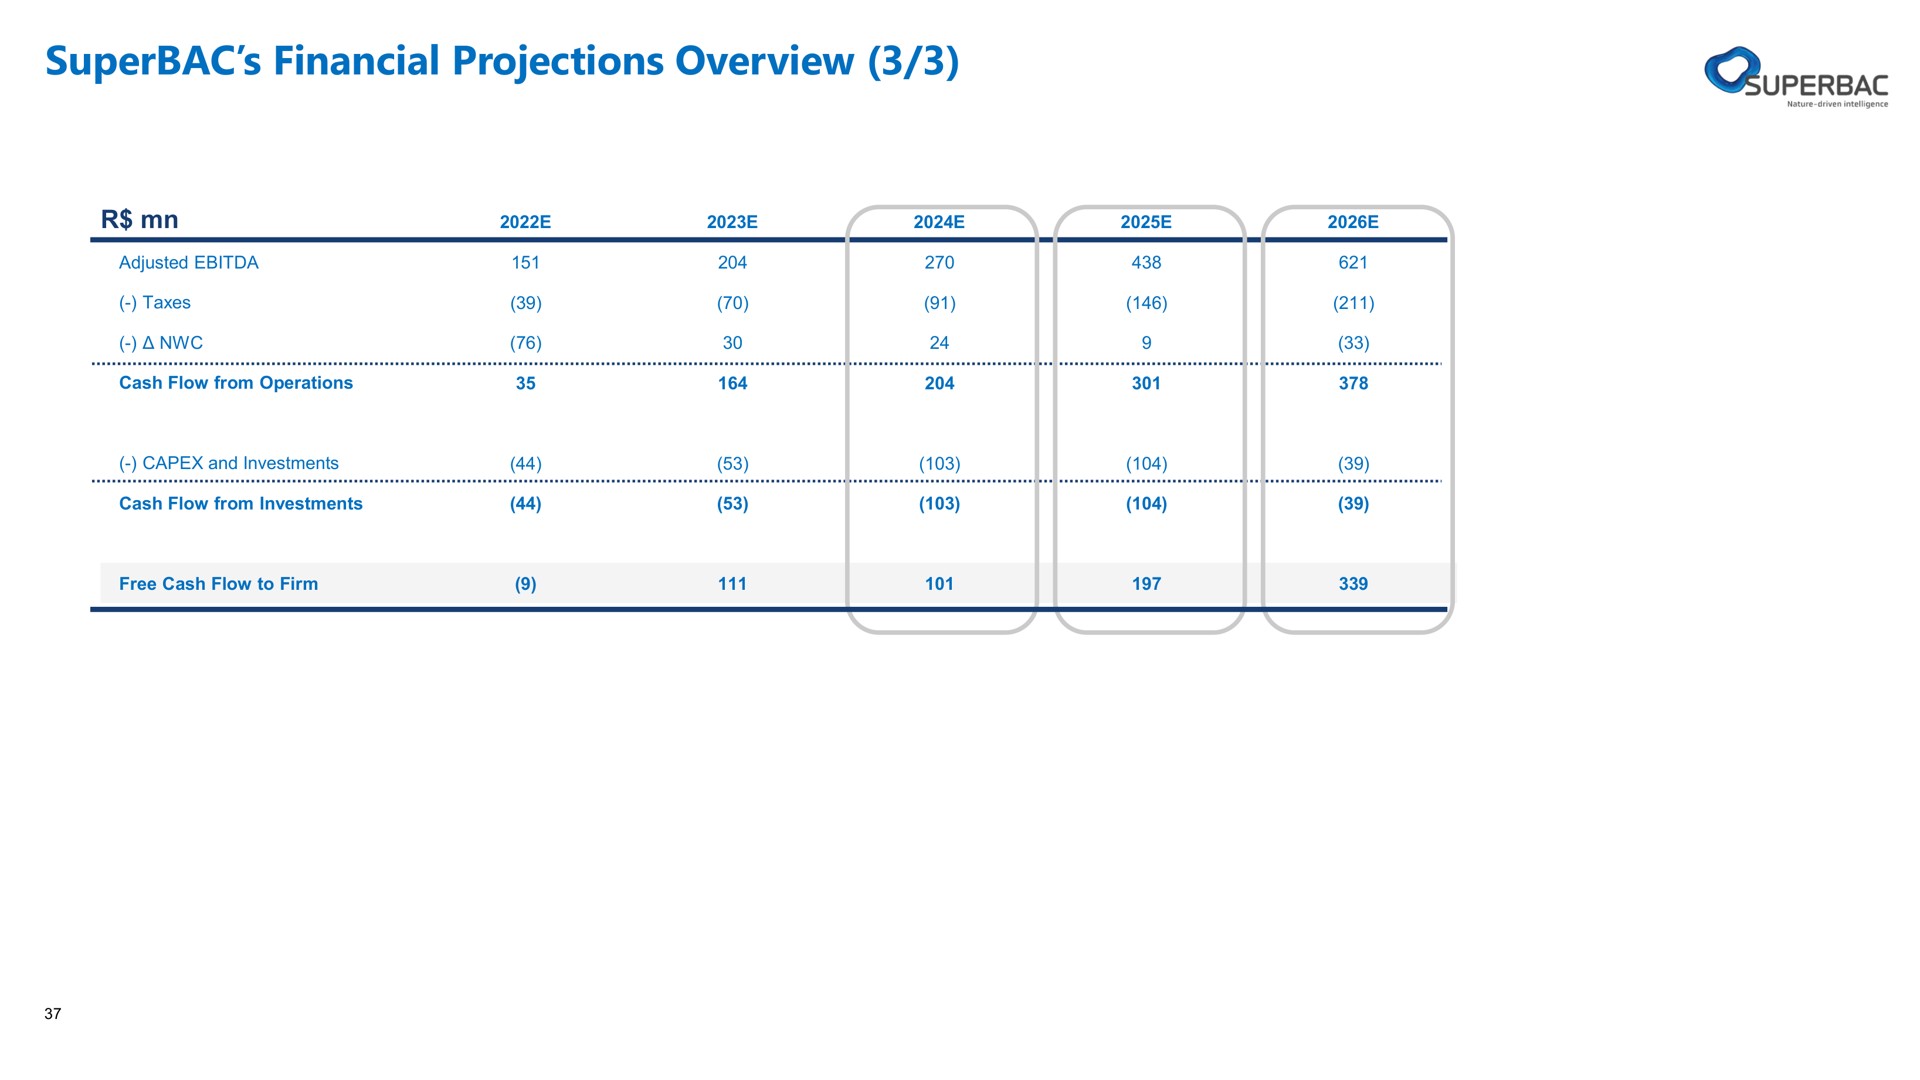 financial projections overview | Superbac